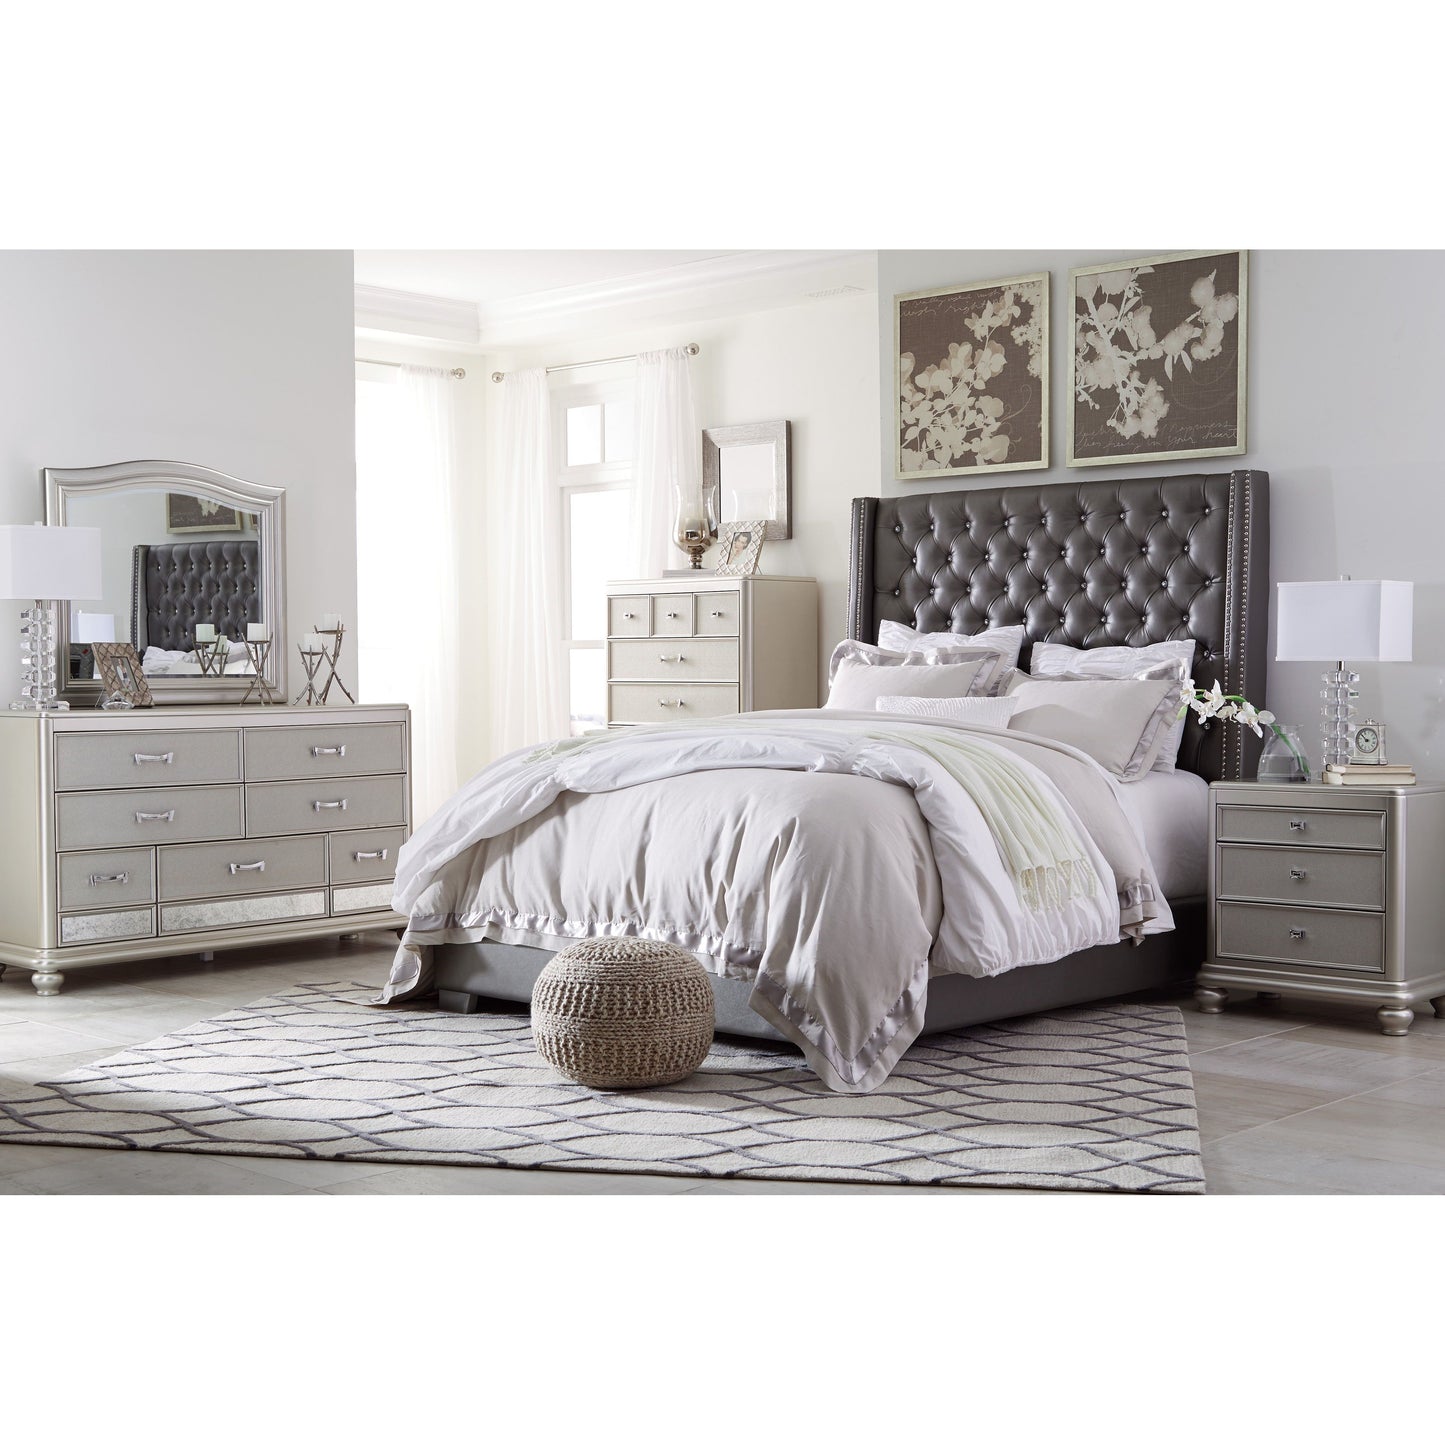 CORALAYNE UPHOLSTERED BED - GRAY